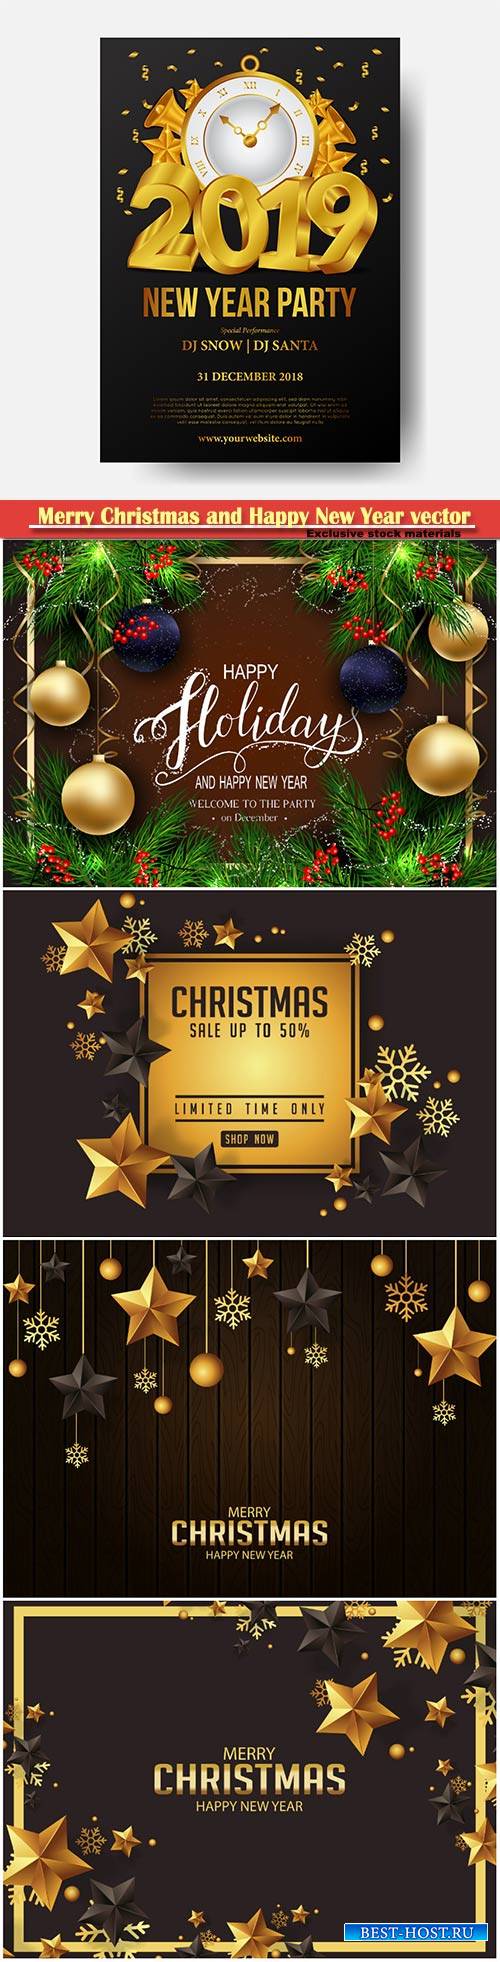 2019 Merry Christmas and Happy New Year vector design # 7